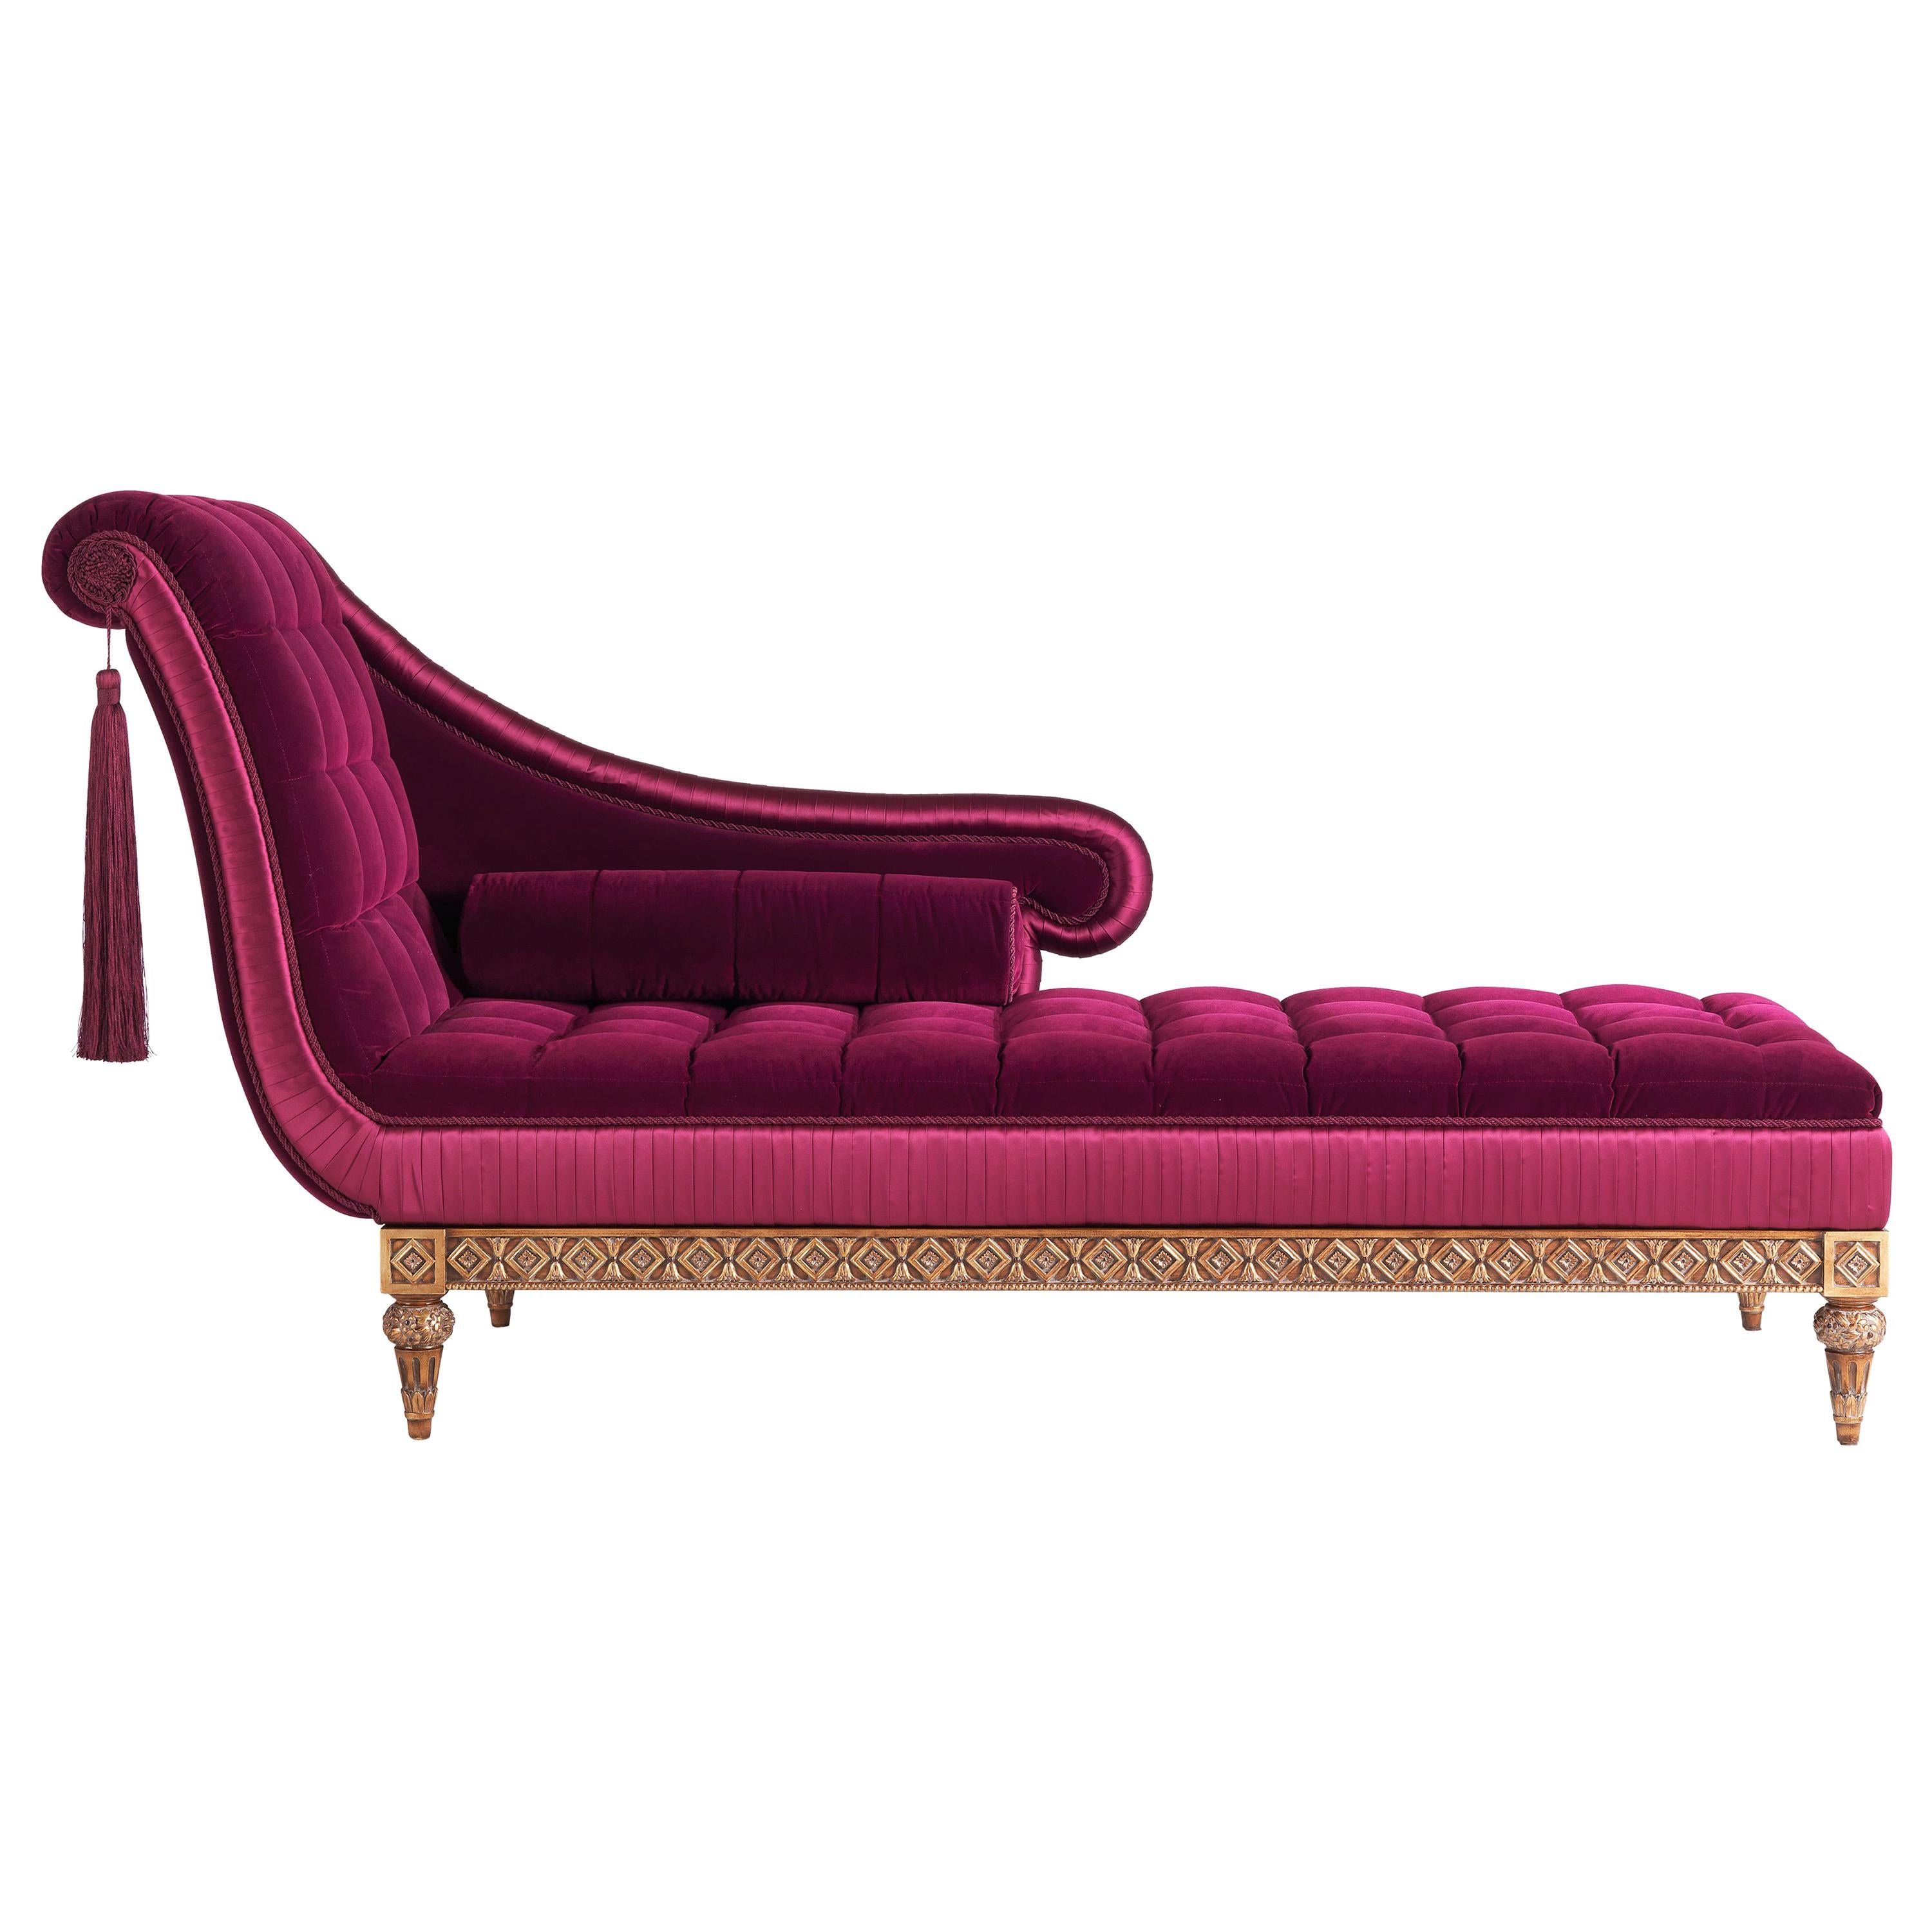 Jacqueline Italian Dormeuse in Wood with Velvet and Satin Details by Zanaboni For Sale